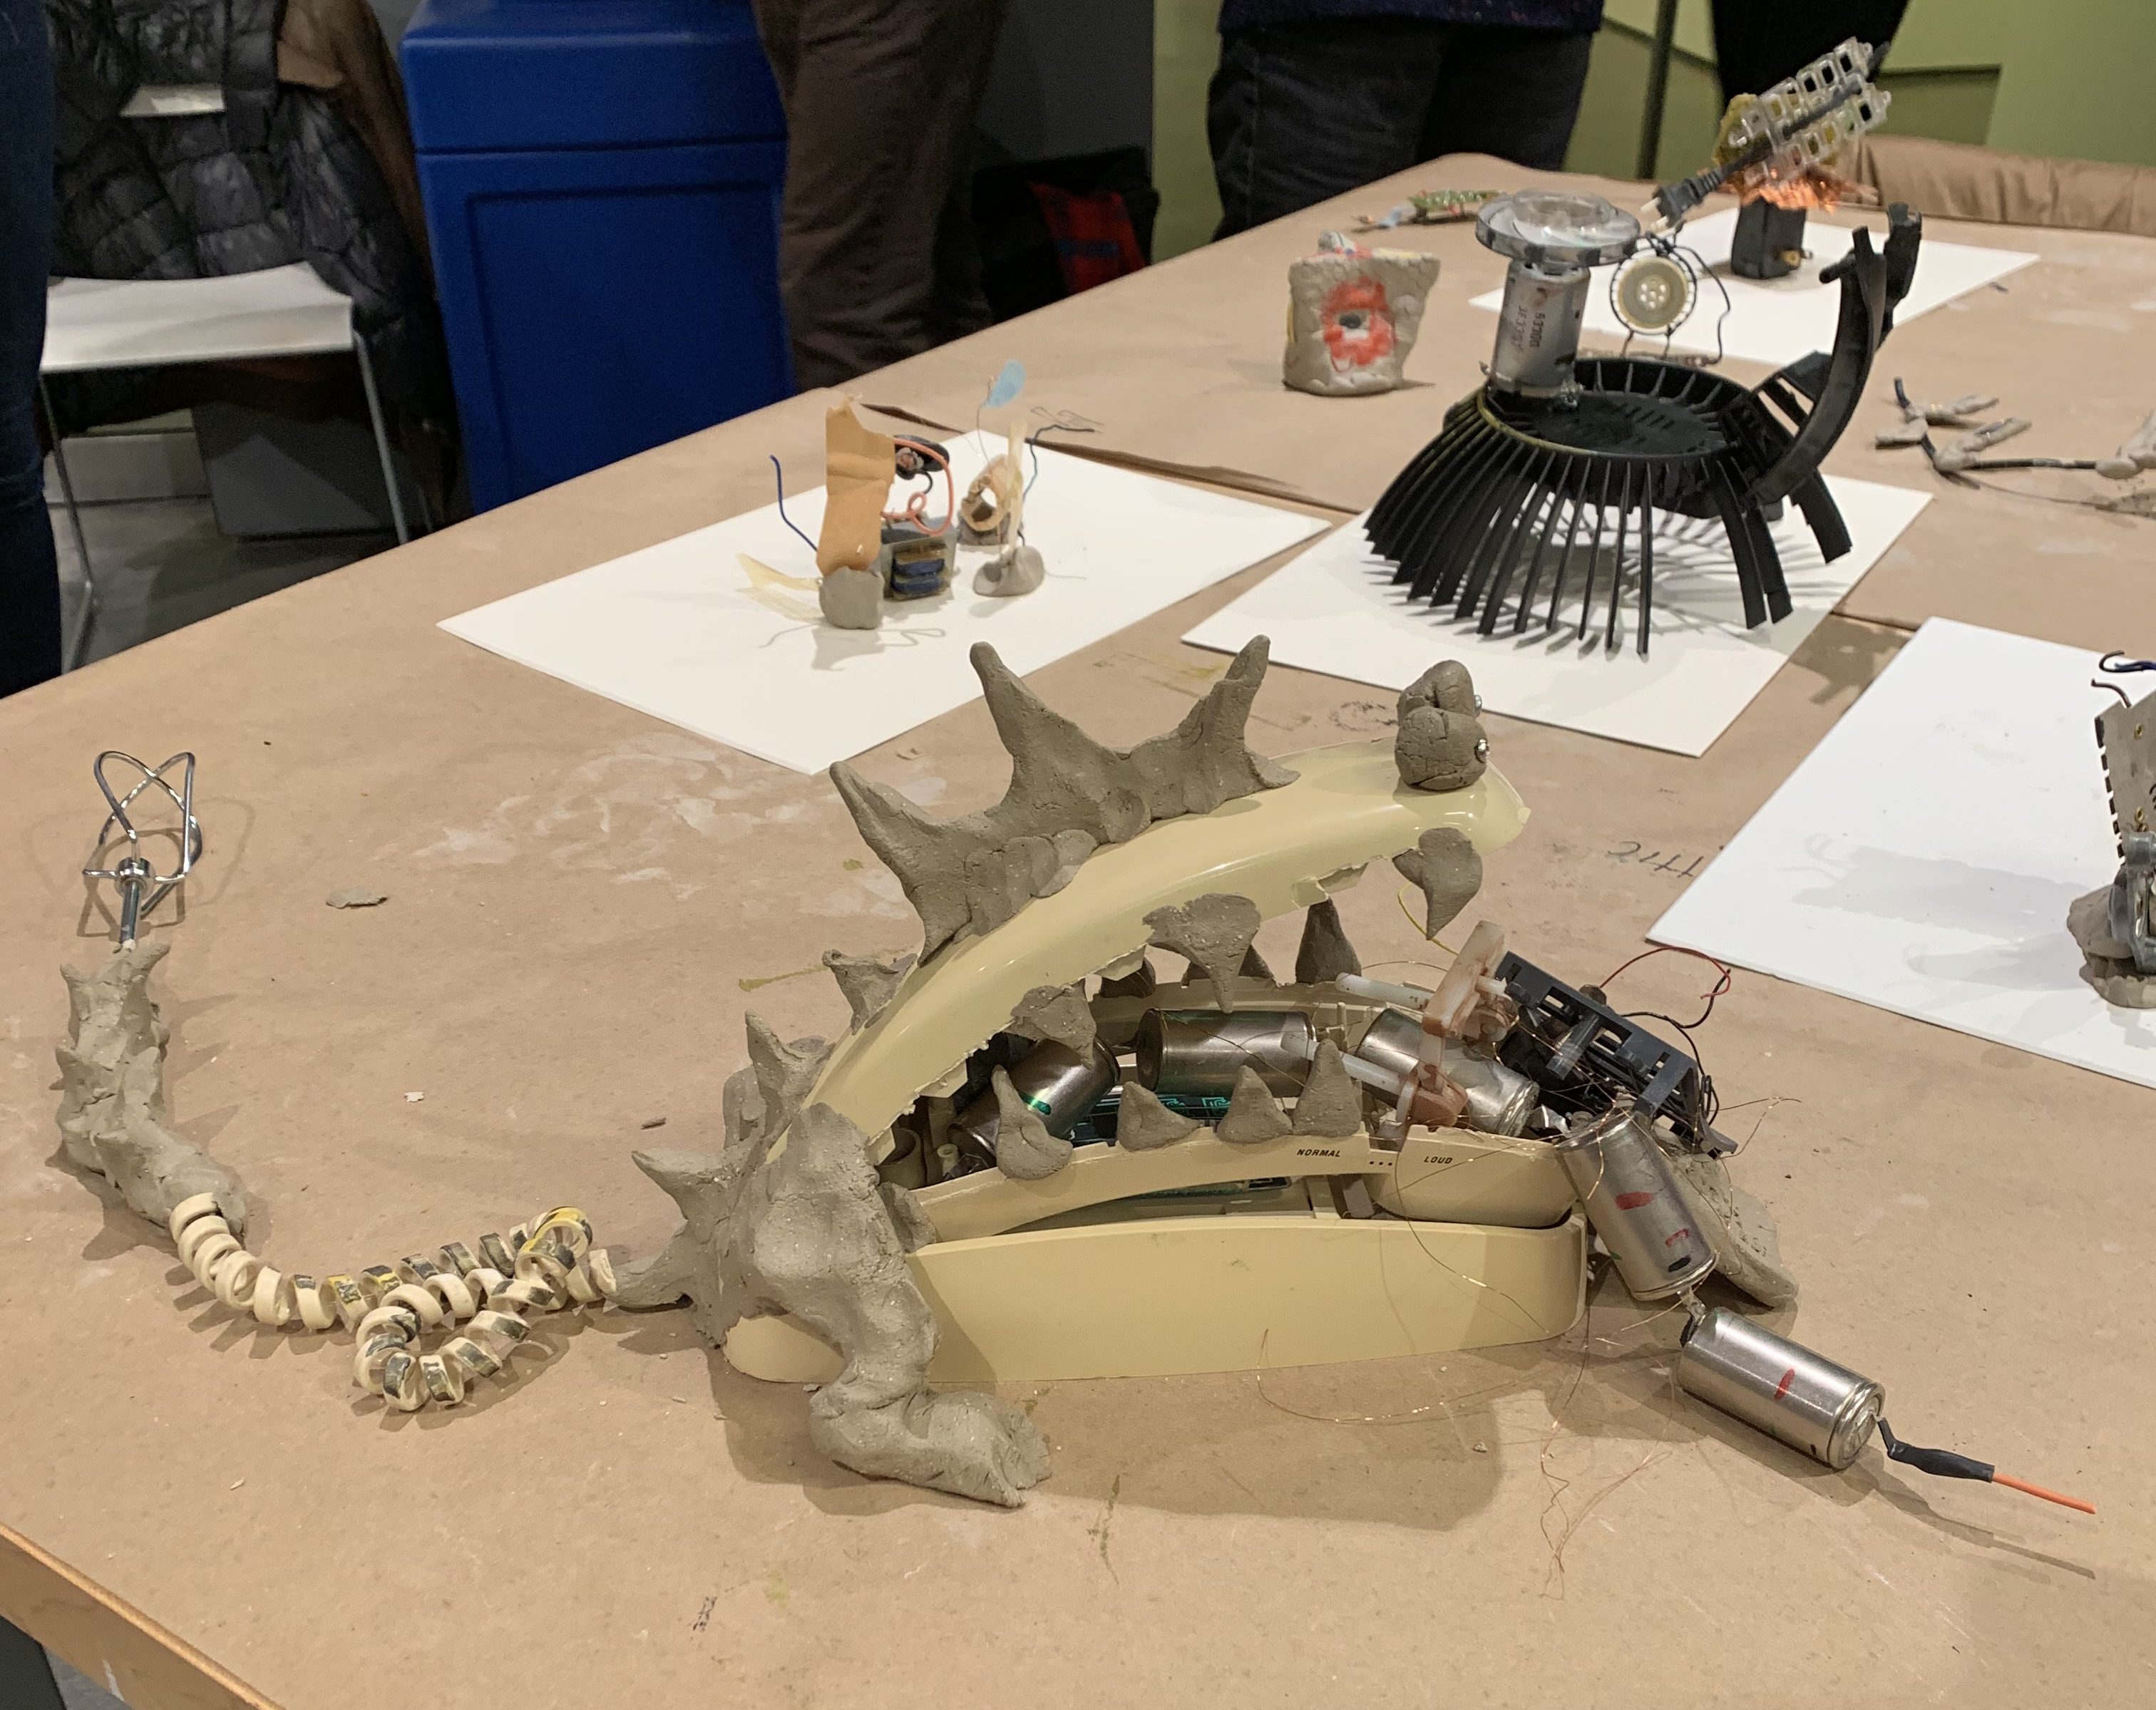 This is a picture of disassembled mechanical objects, remade into other assemblages. Specifically featured here is a large-mouthed monster with a phone-receiver serving as its jaw.